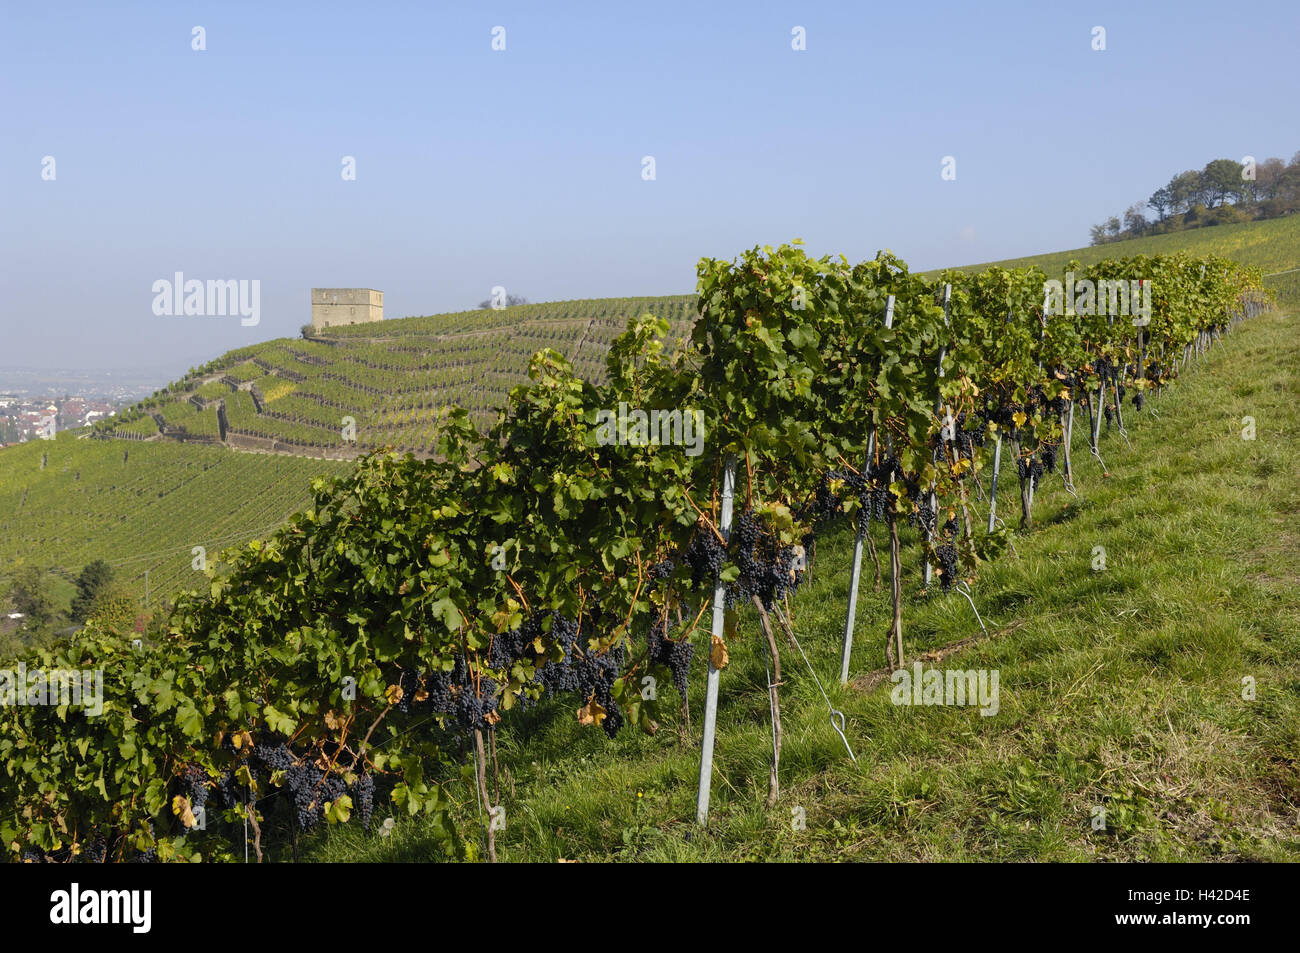 Germany, Baden-Wurttemberg, Stetten, Remstal, vineyard, Yburg, Rems Rems-Murr-Kreis, viticulture, harvest time, leaves, yellow, green, autumn, autumn staining, hill, foliage, vines, Rebsorten, vines, series, viticulture, wine-growing, vineyards, vines, economy, building, structure, castle, detail, tower, architecture, historically, Stock Photo